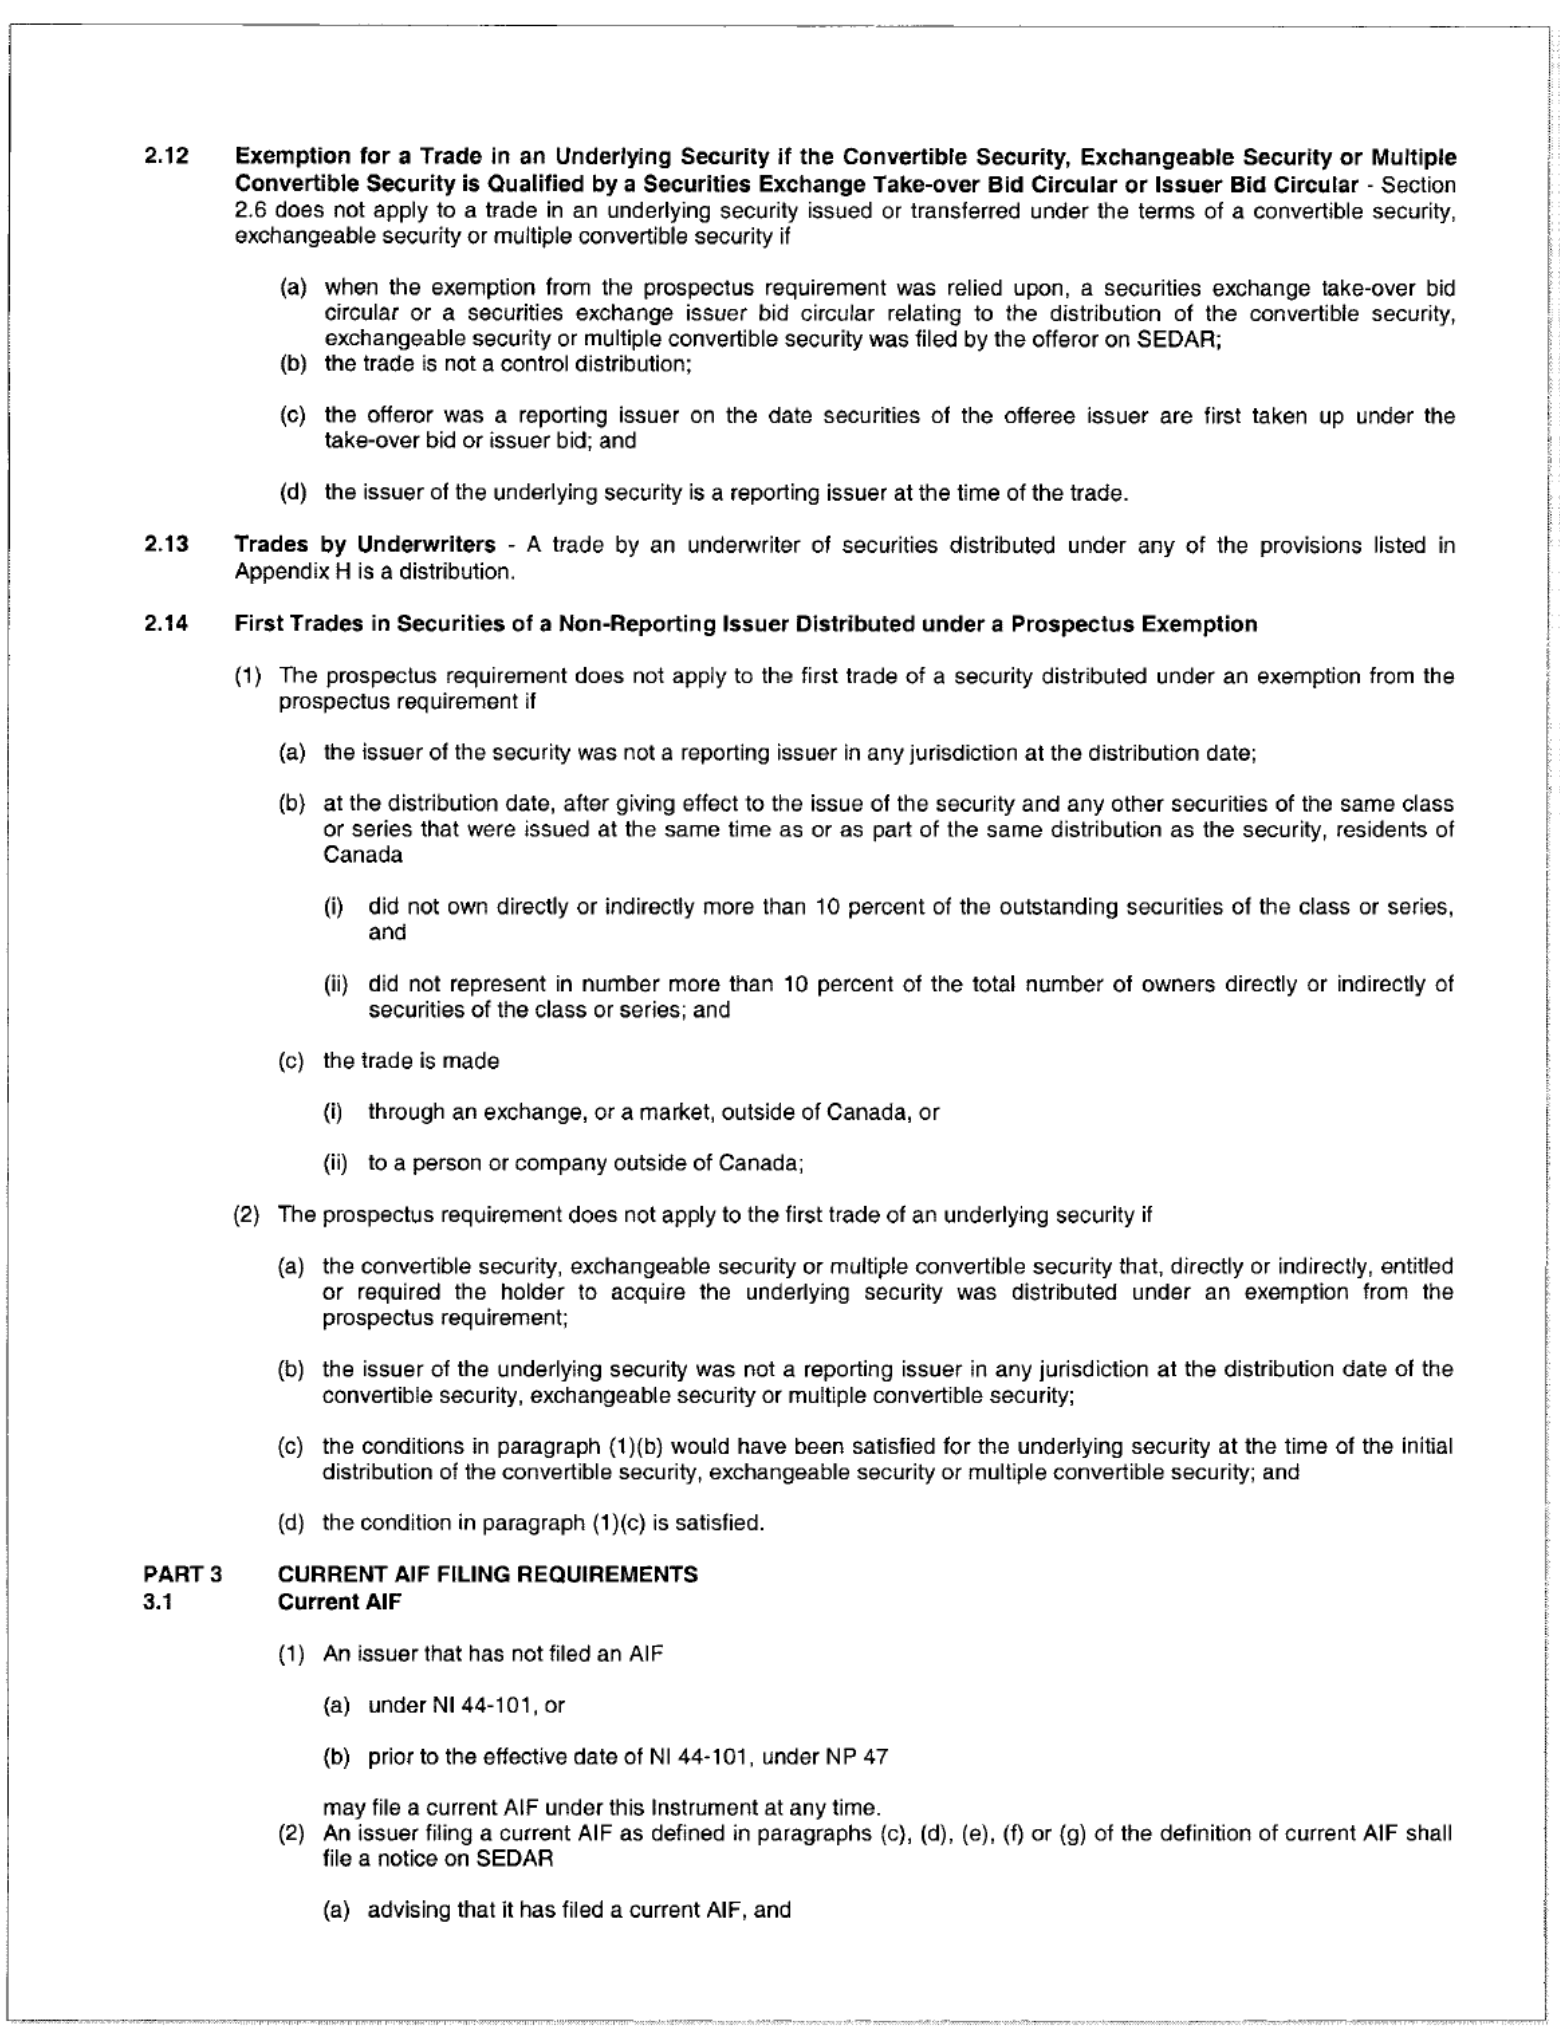 Image containing information of ontario securities commission